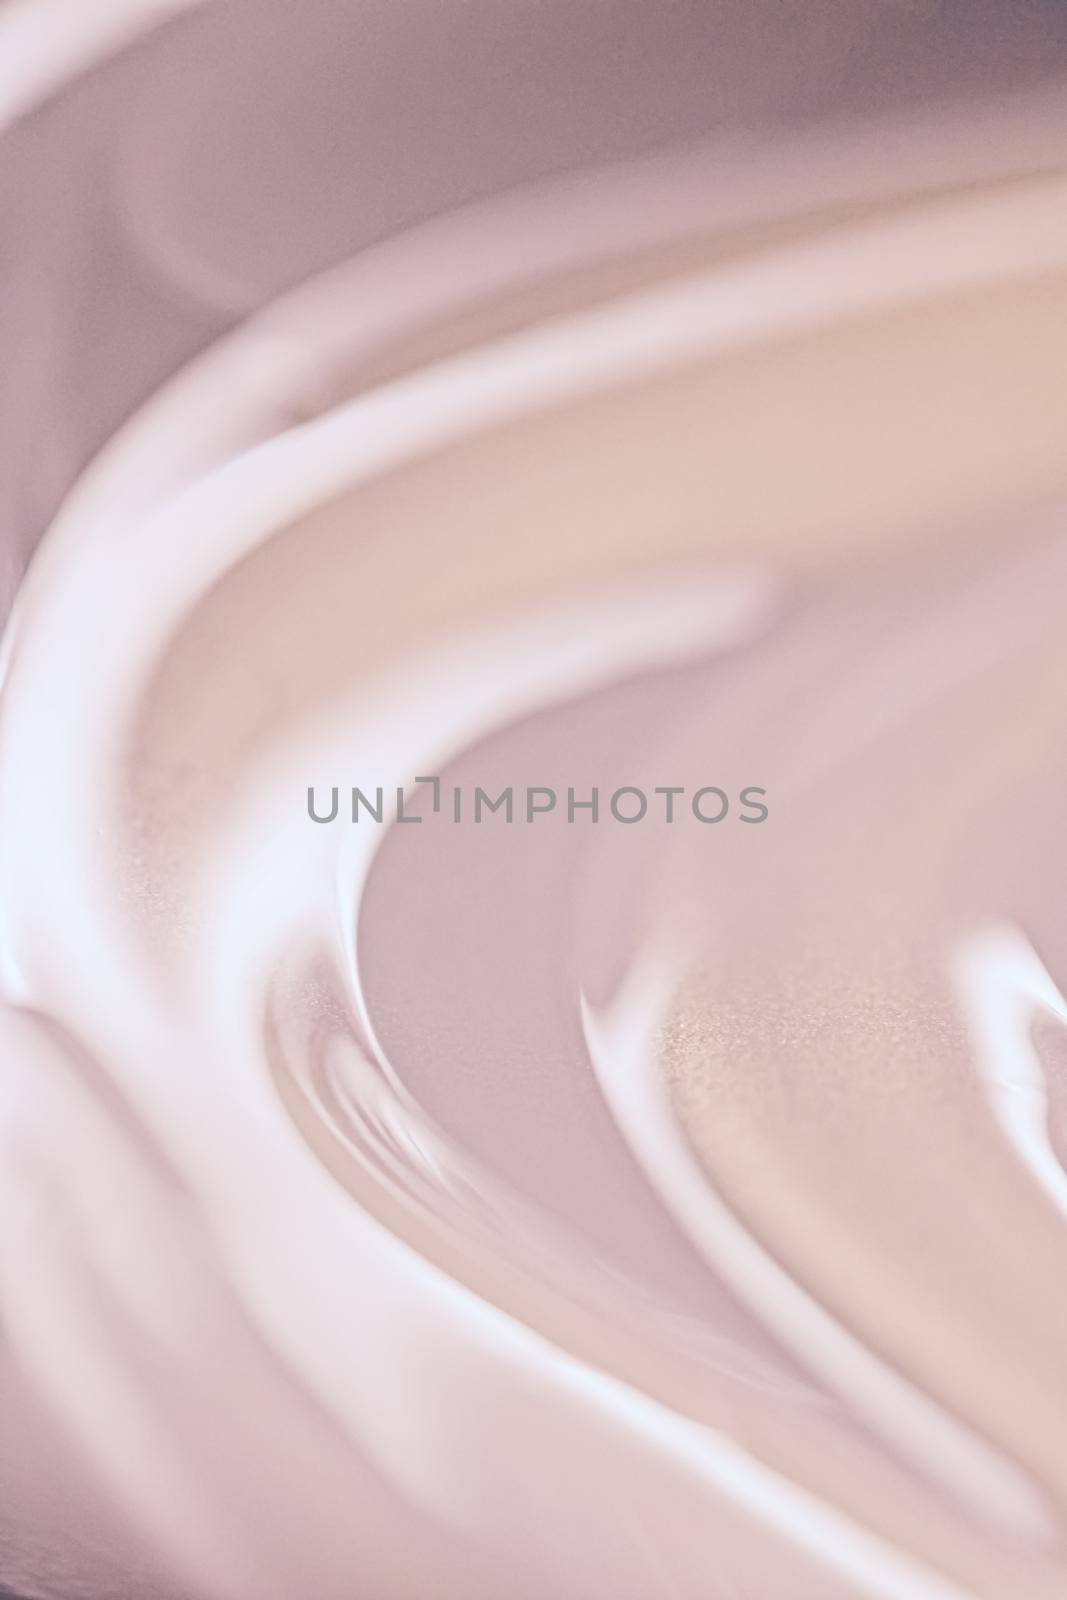 Glowing cosmetic emulsion, rose gold cream or lotion as beauty and skincare background closeup